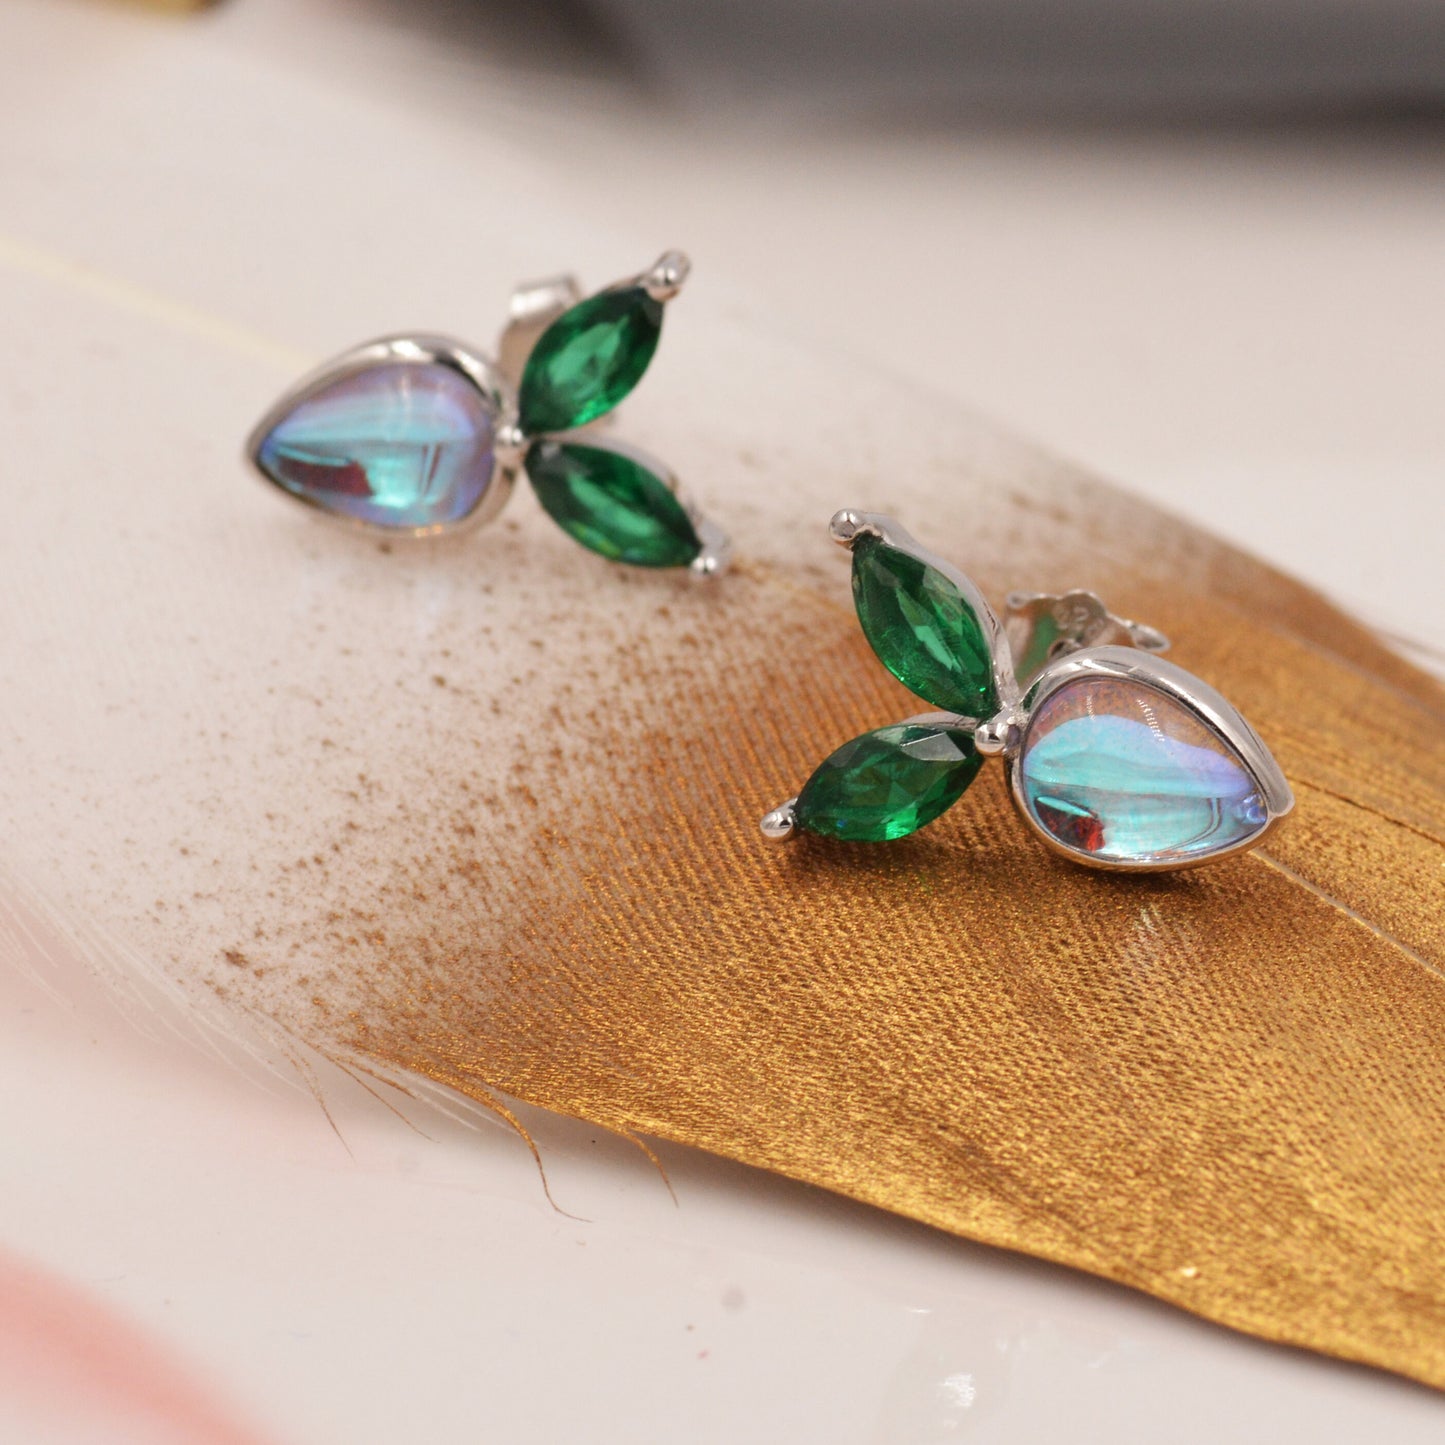 Cute Carrot Stud Earrings in Sterling Silver with Colour Changing Glass Crystals - Simulated Moonstones - Cute, Fun, Whimsical